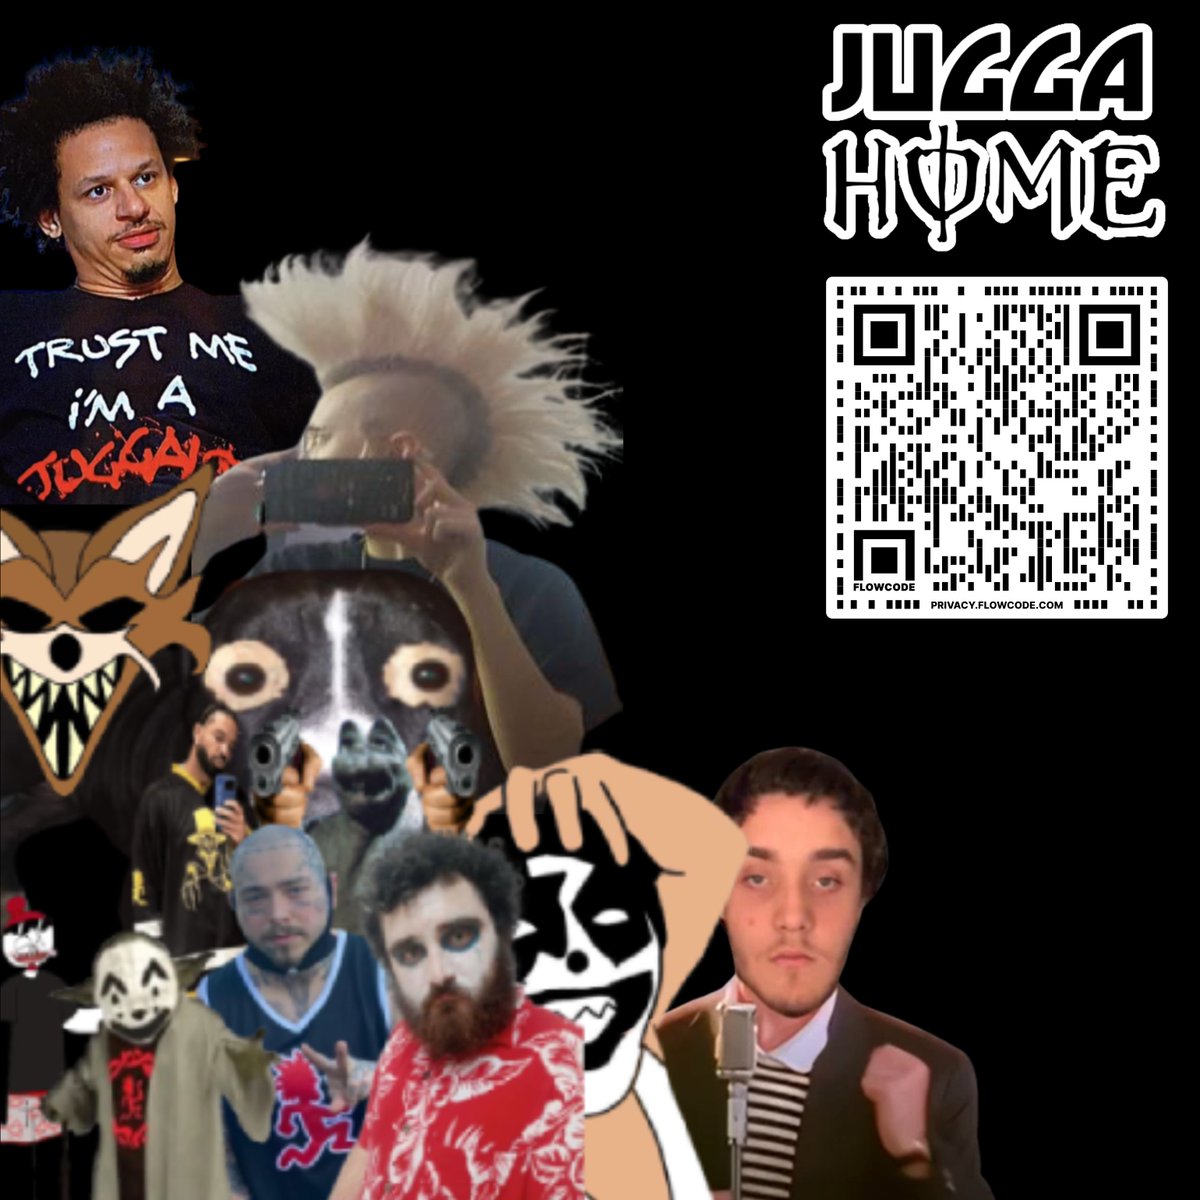 Join Juggahome, I'm in there and shit, I even made this poster.

#ICP #MNE #LLE #LSP #MonstarEnt #UnitedUnderground #juggalo #Discord 

discord.gg/Yt6rE85rhQ